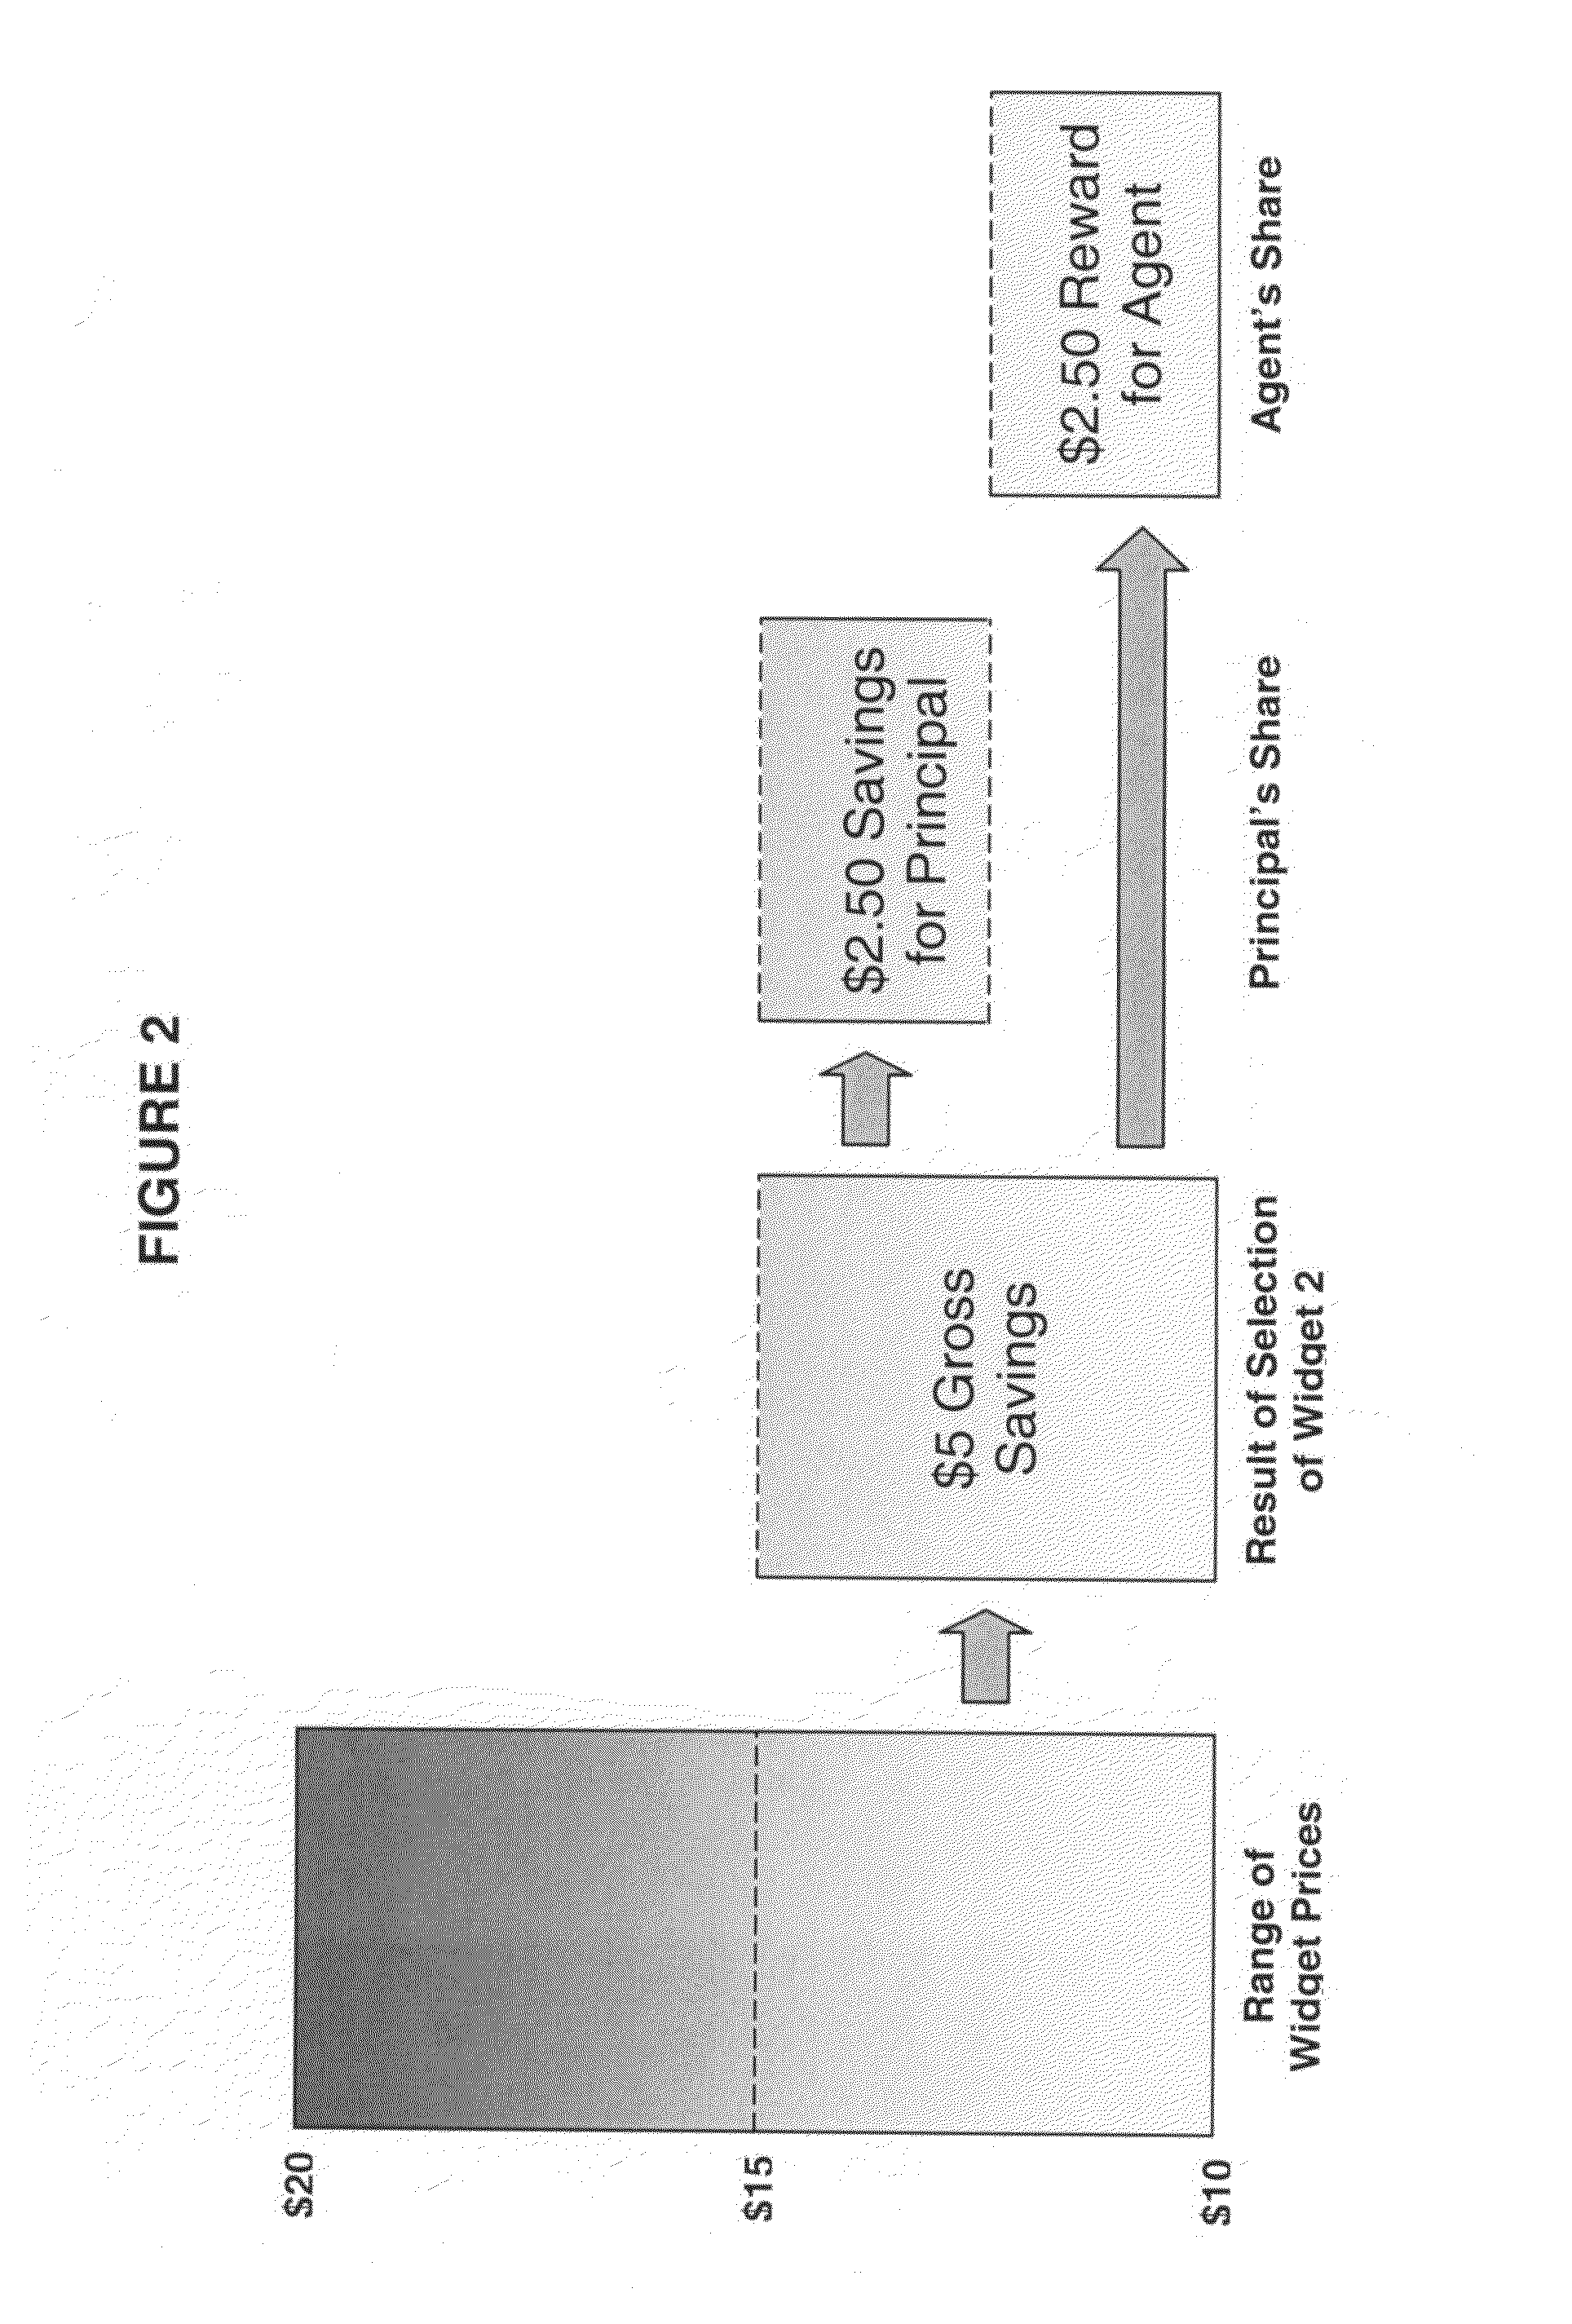 Systems and/or methods for incentivizing agent-based decision-making